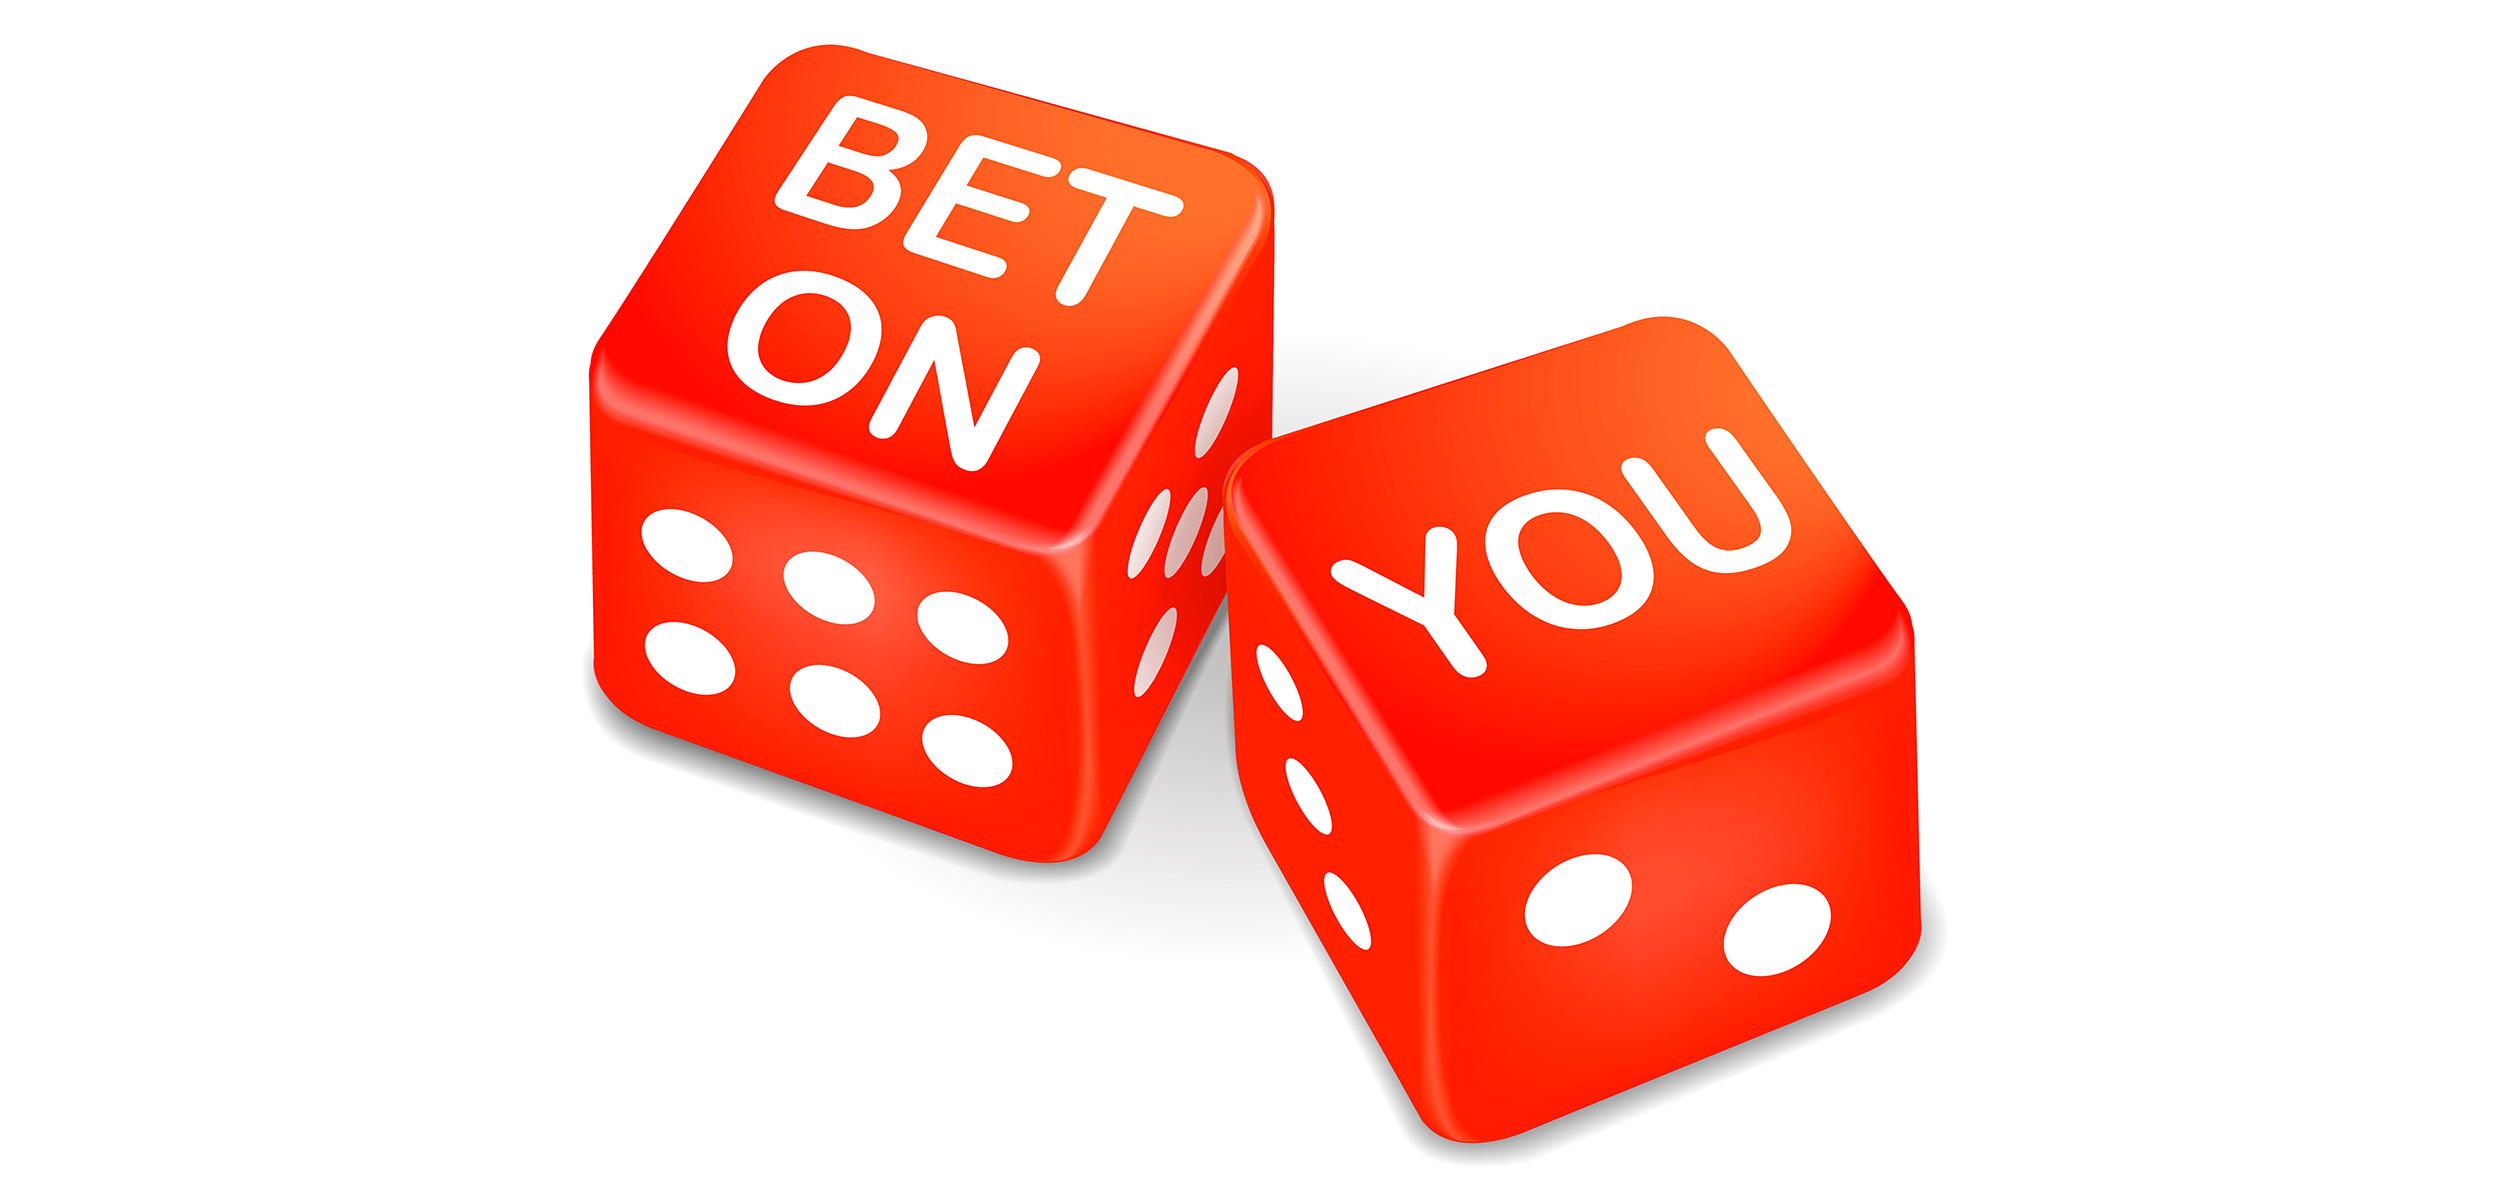 bet on you words on two red dice over white background